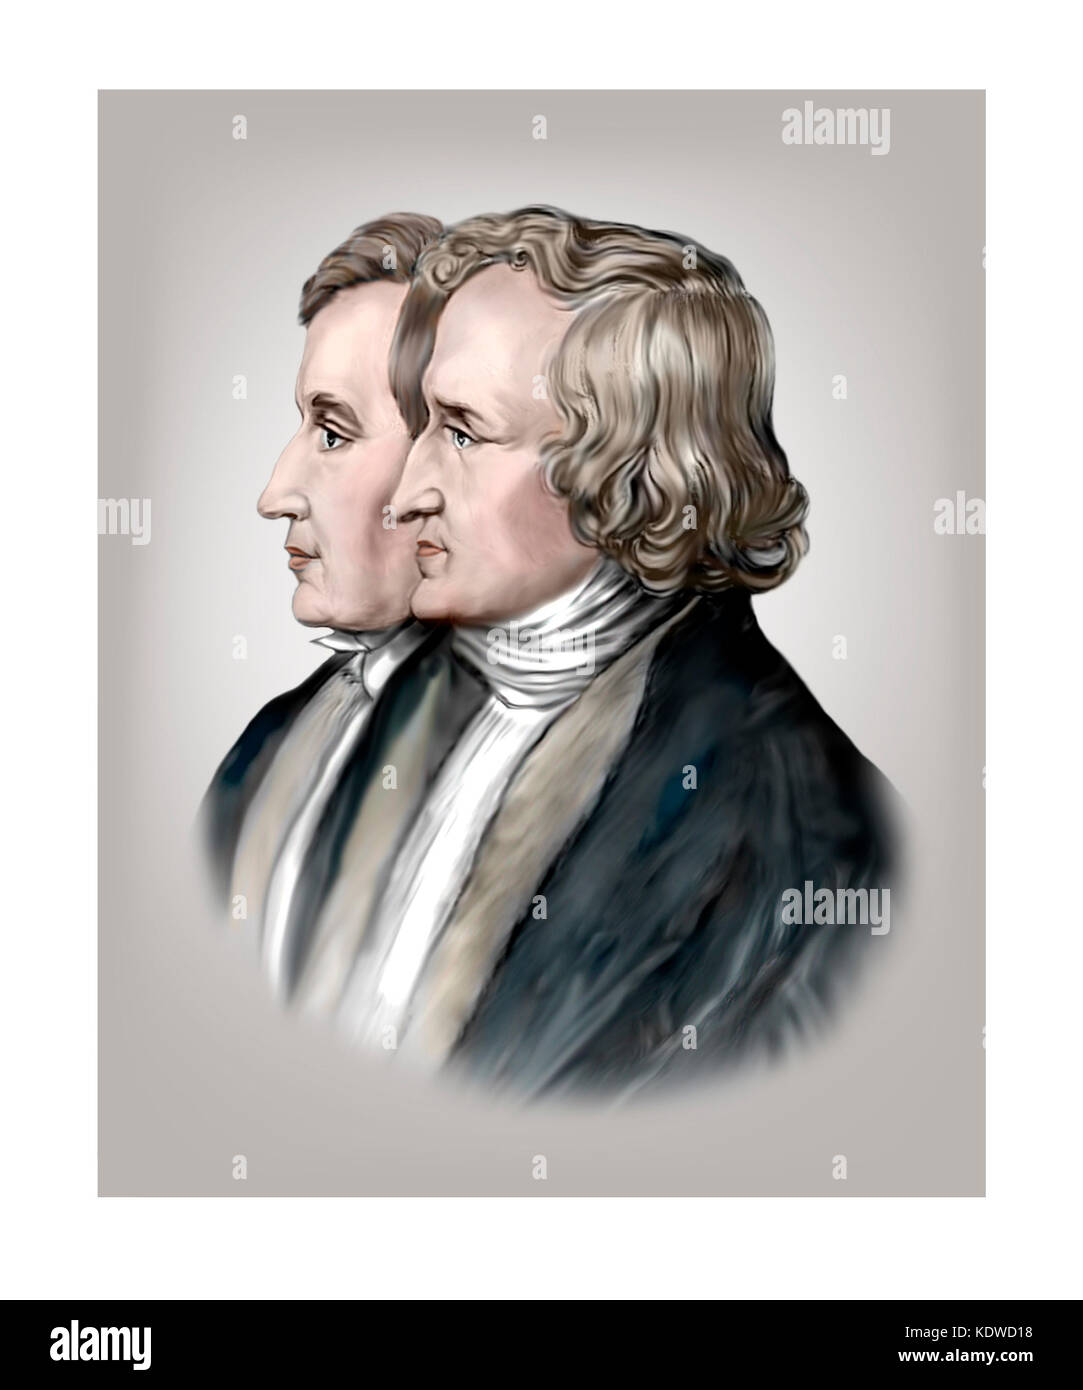 Grimm Brothers, Jacob and Wilhelm Grimm, German Academics, Philologists, Authors of Folklore Stock Photo